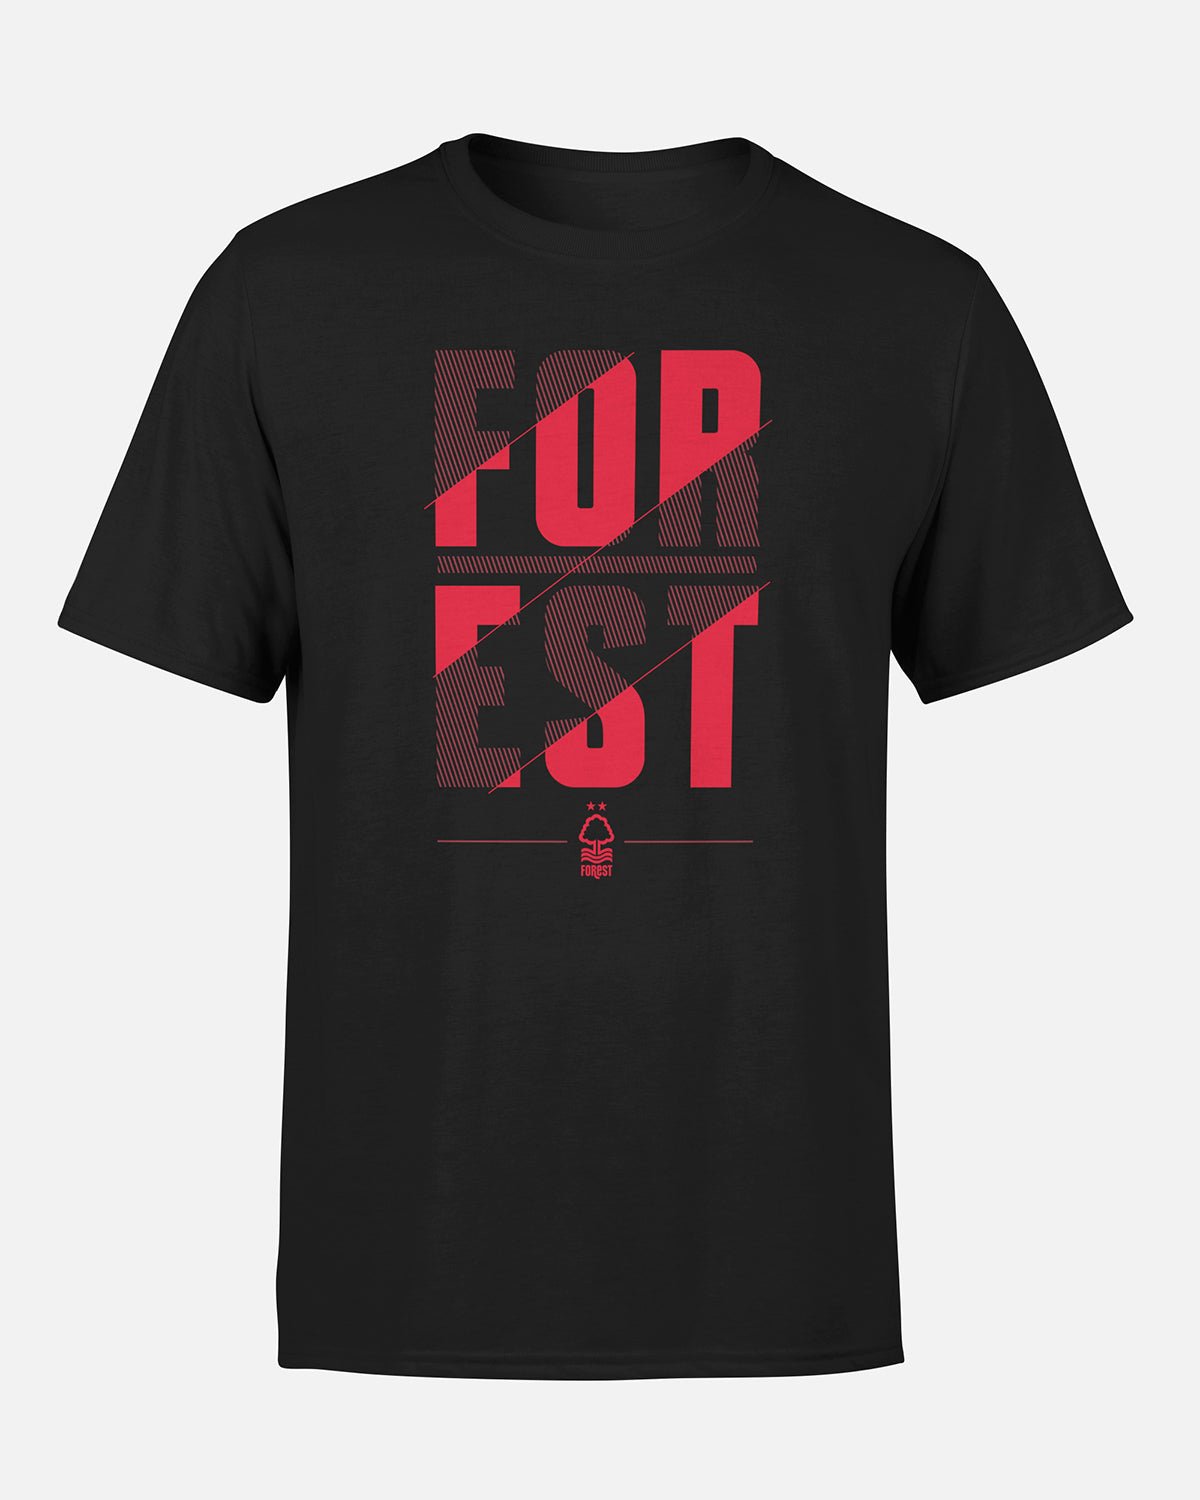 NFFC Adult Black Stacked Forest T-Shirt - Nottingham Forest FC